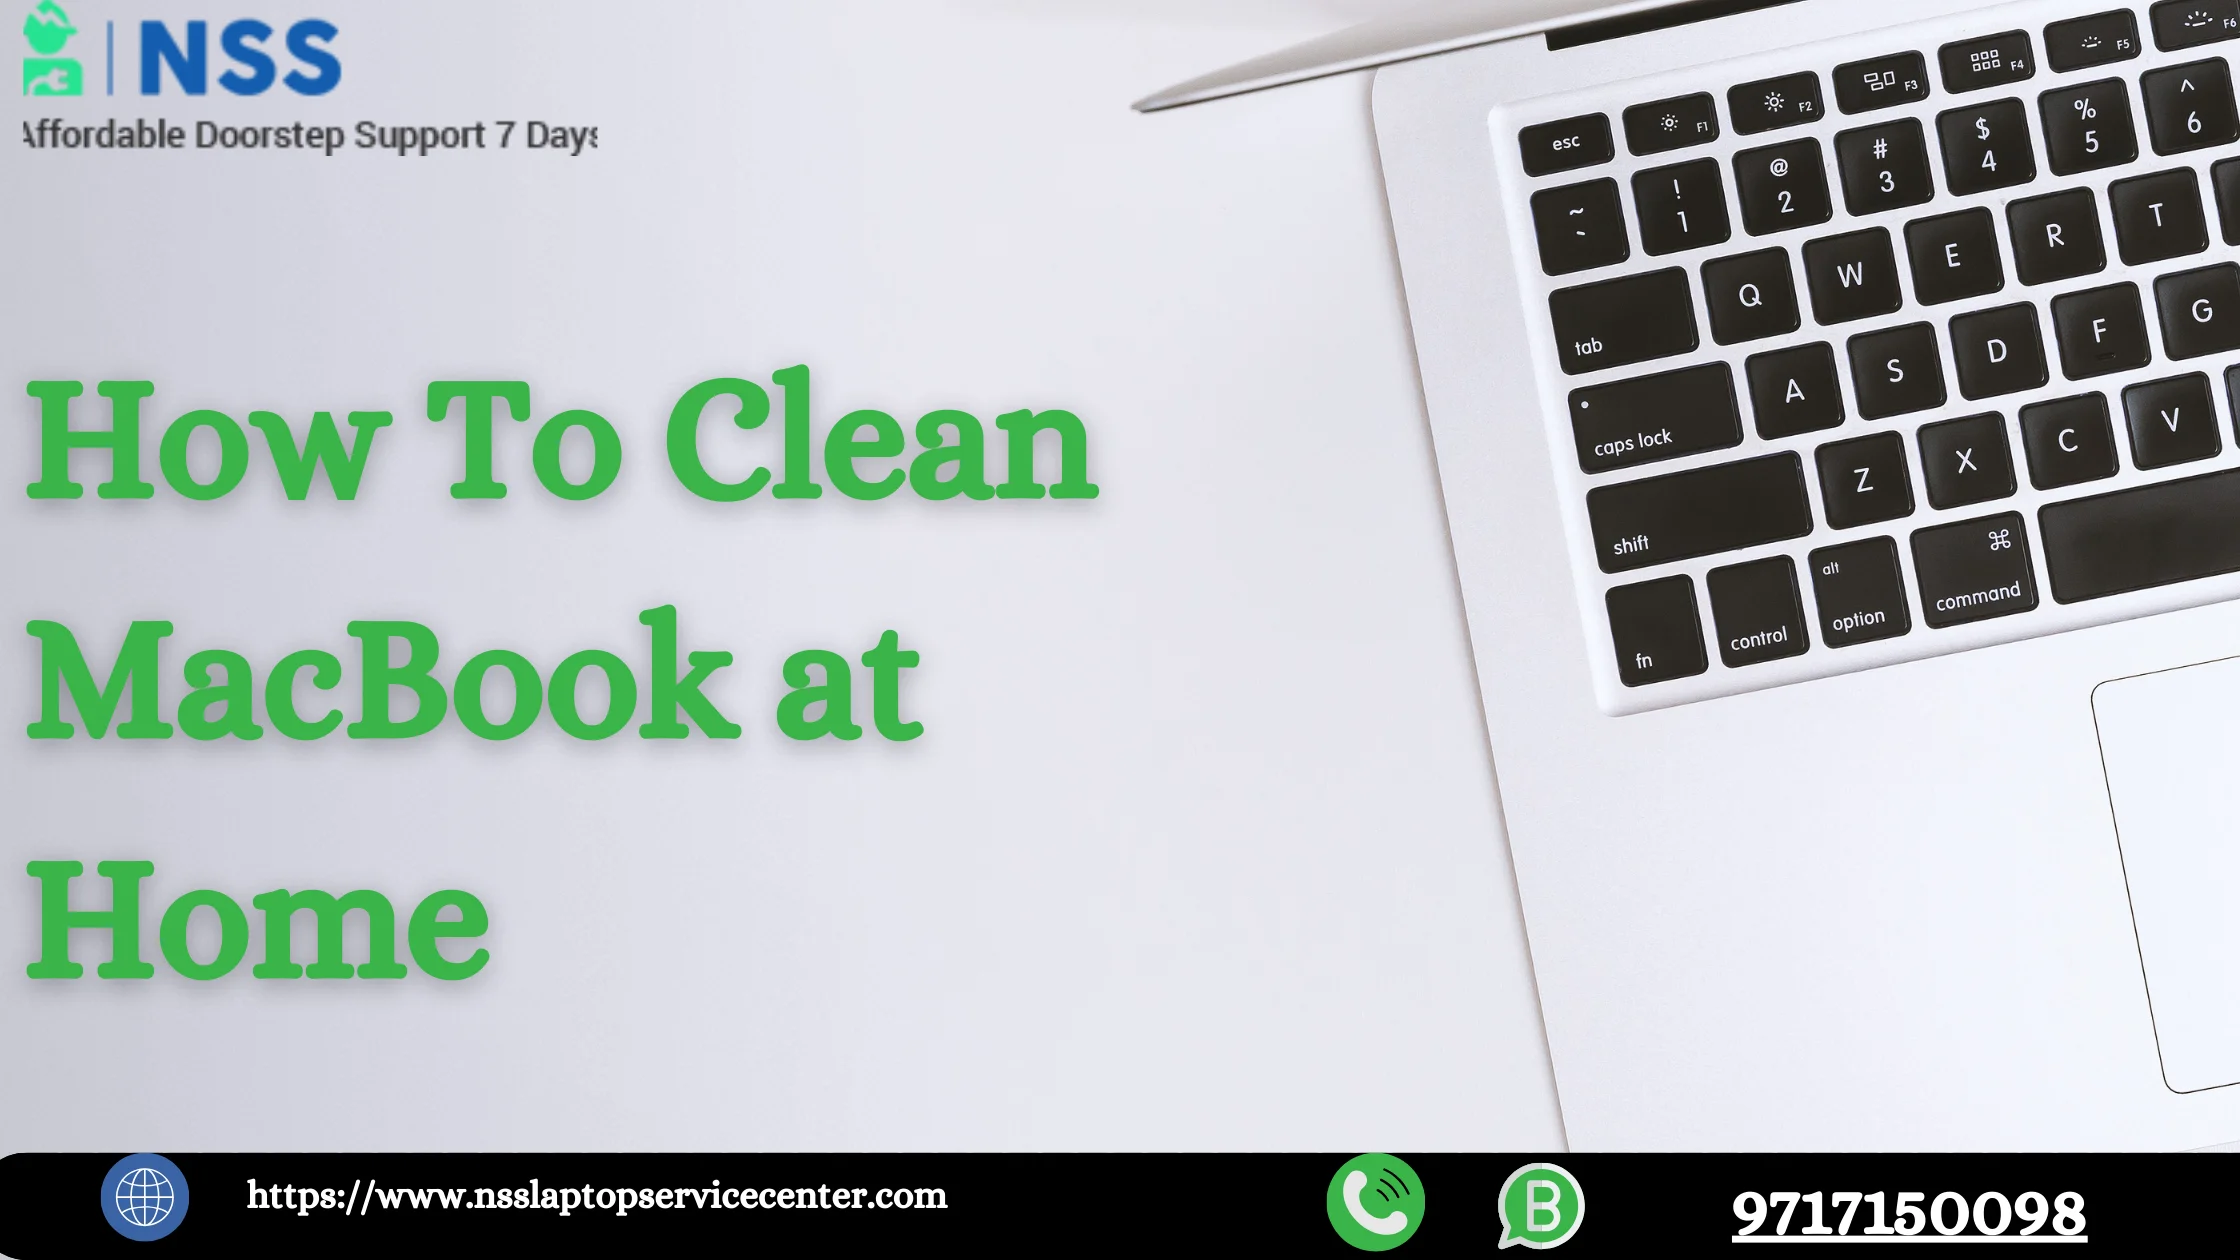 How To Clean MacBook at Home